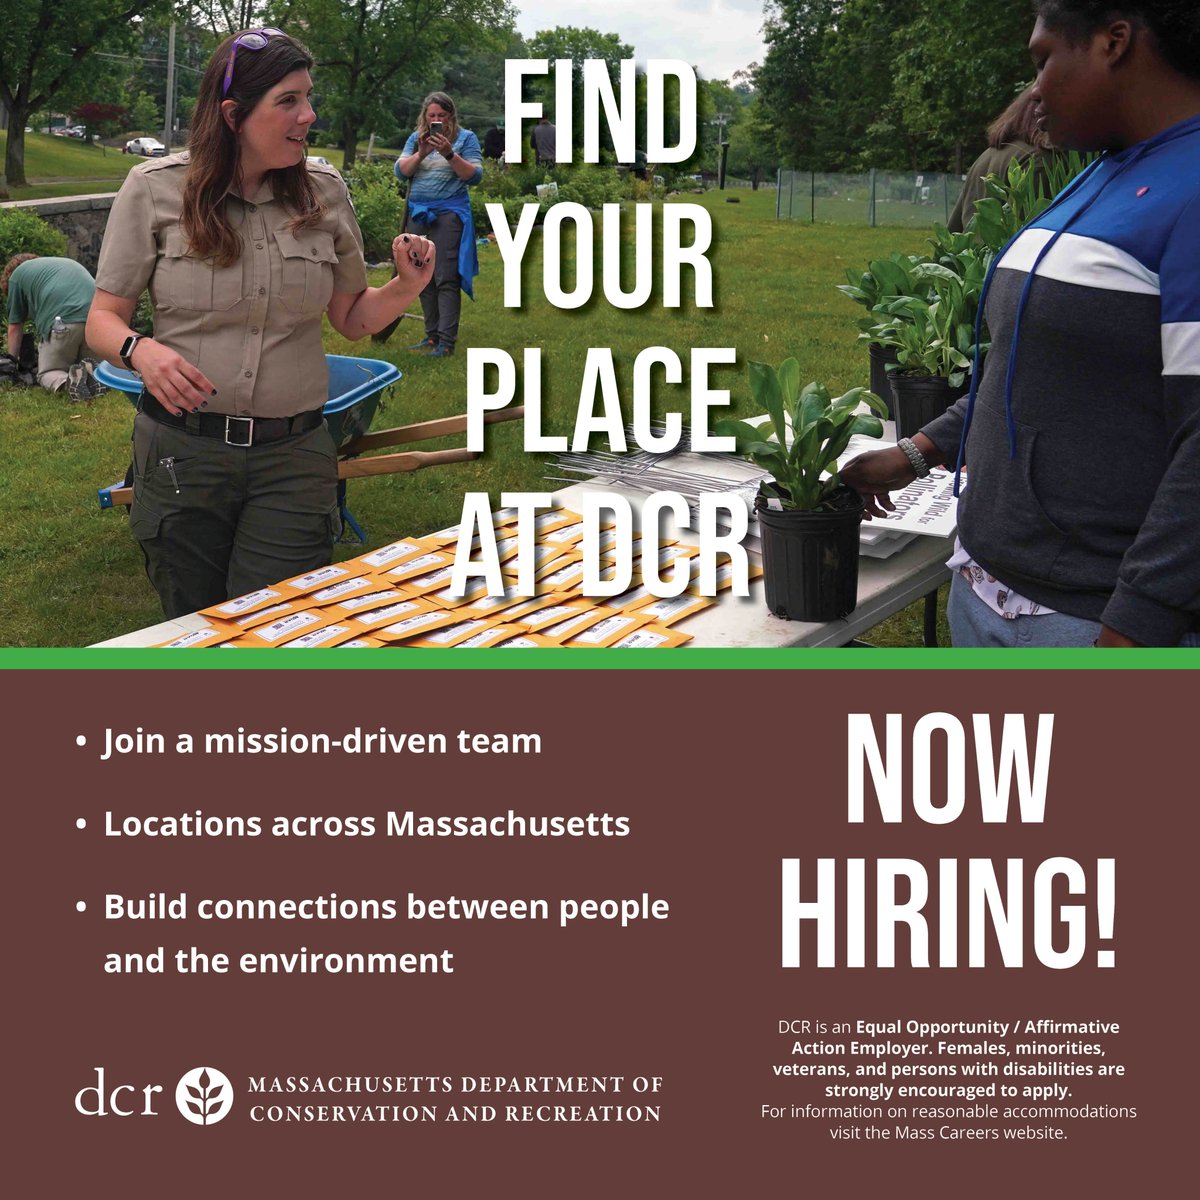 Work in our state park system or join another area of the @massdcr team by applying for one of the many positions available across the agency and all across Massachusetts! Find you place at DCR today: bit.ly/JobsDCR #MAPoli #MALeg